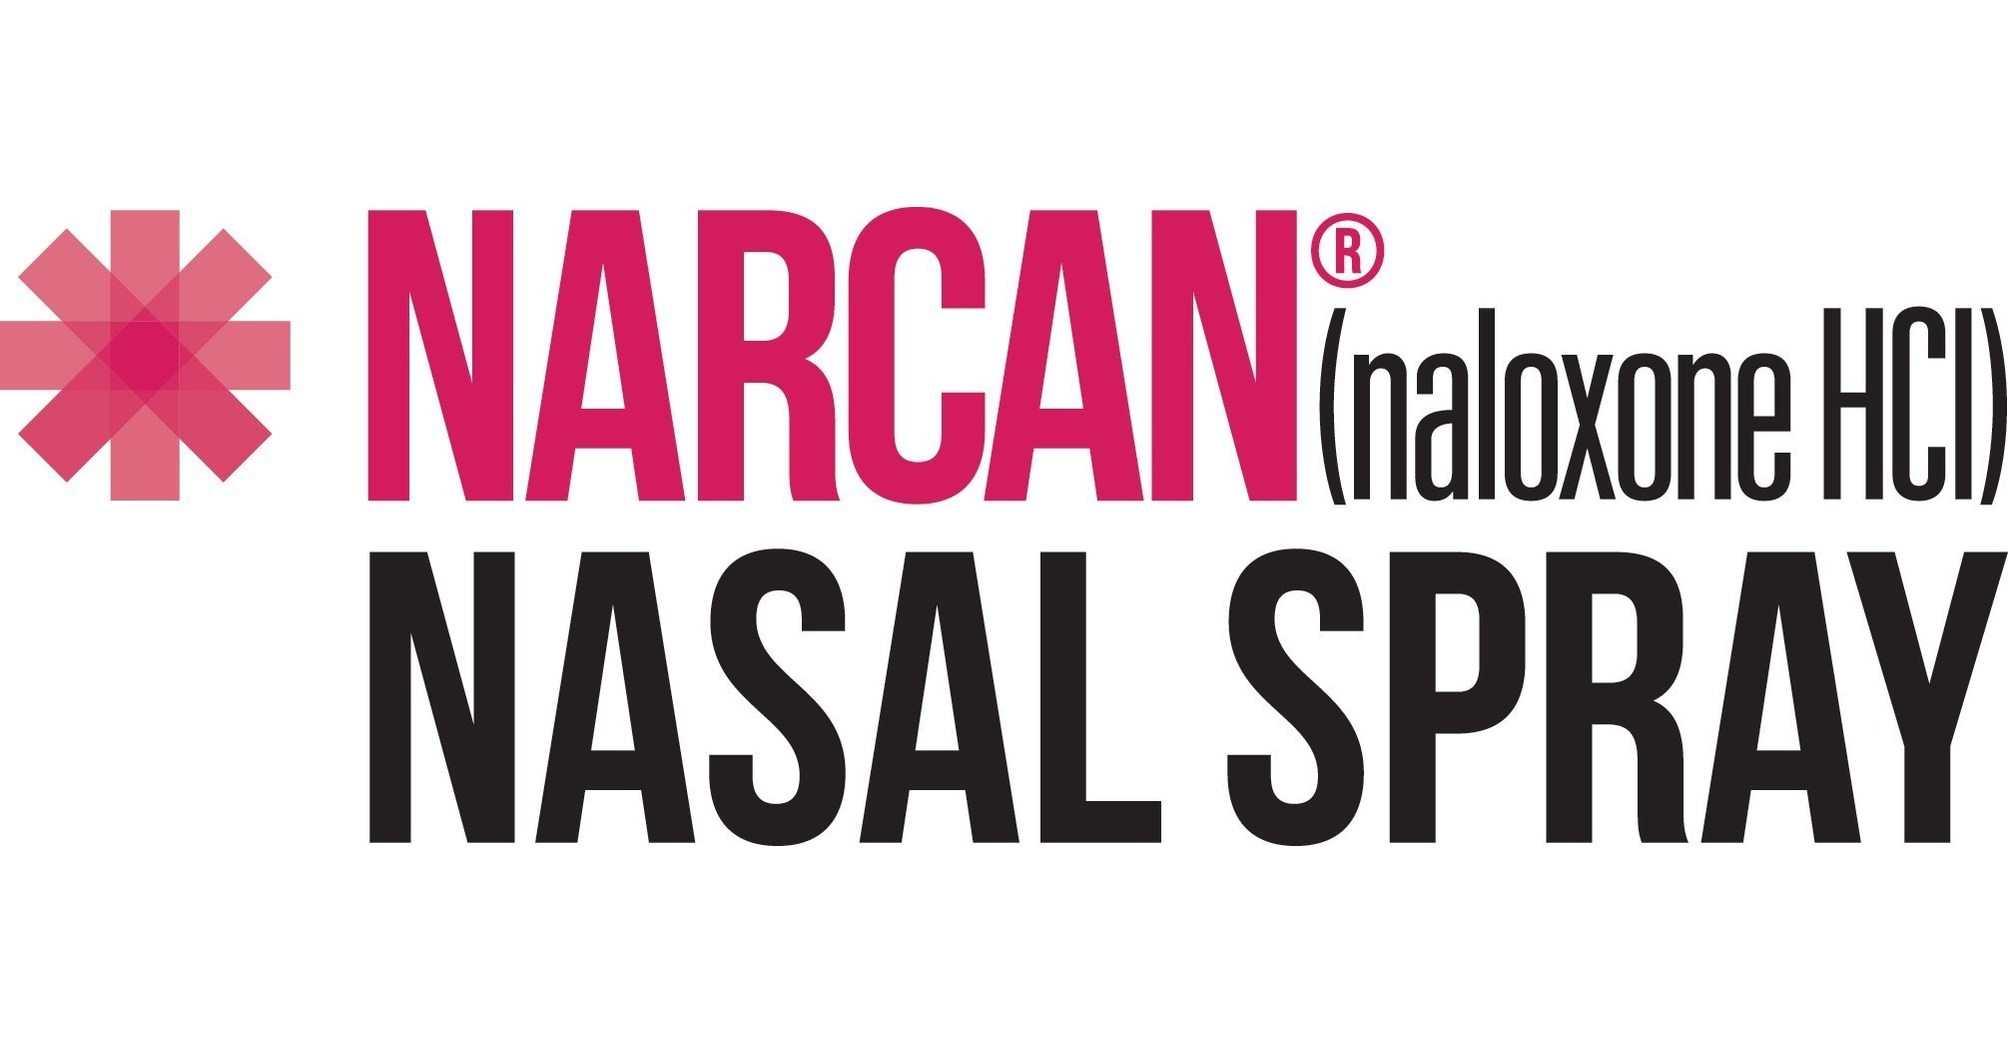 Narcan® Naloxone Hcl Nasal Spray 2mg Approved By Us Food And Drug Administration Fda